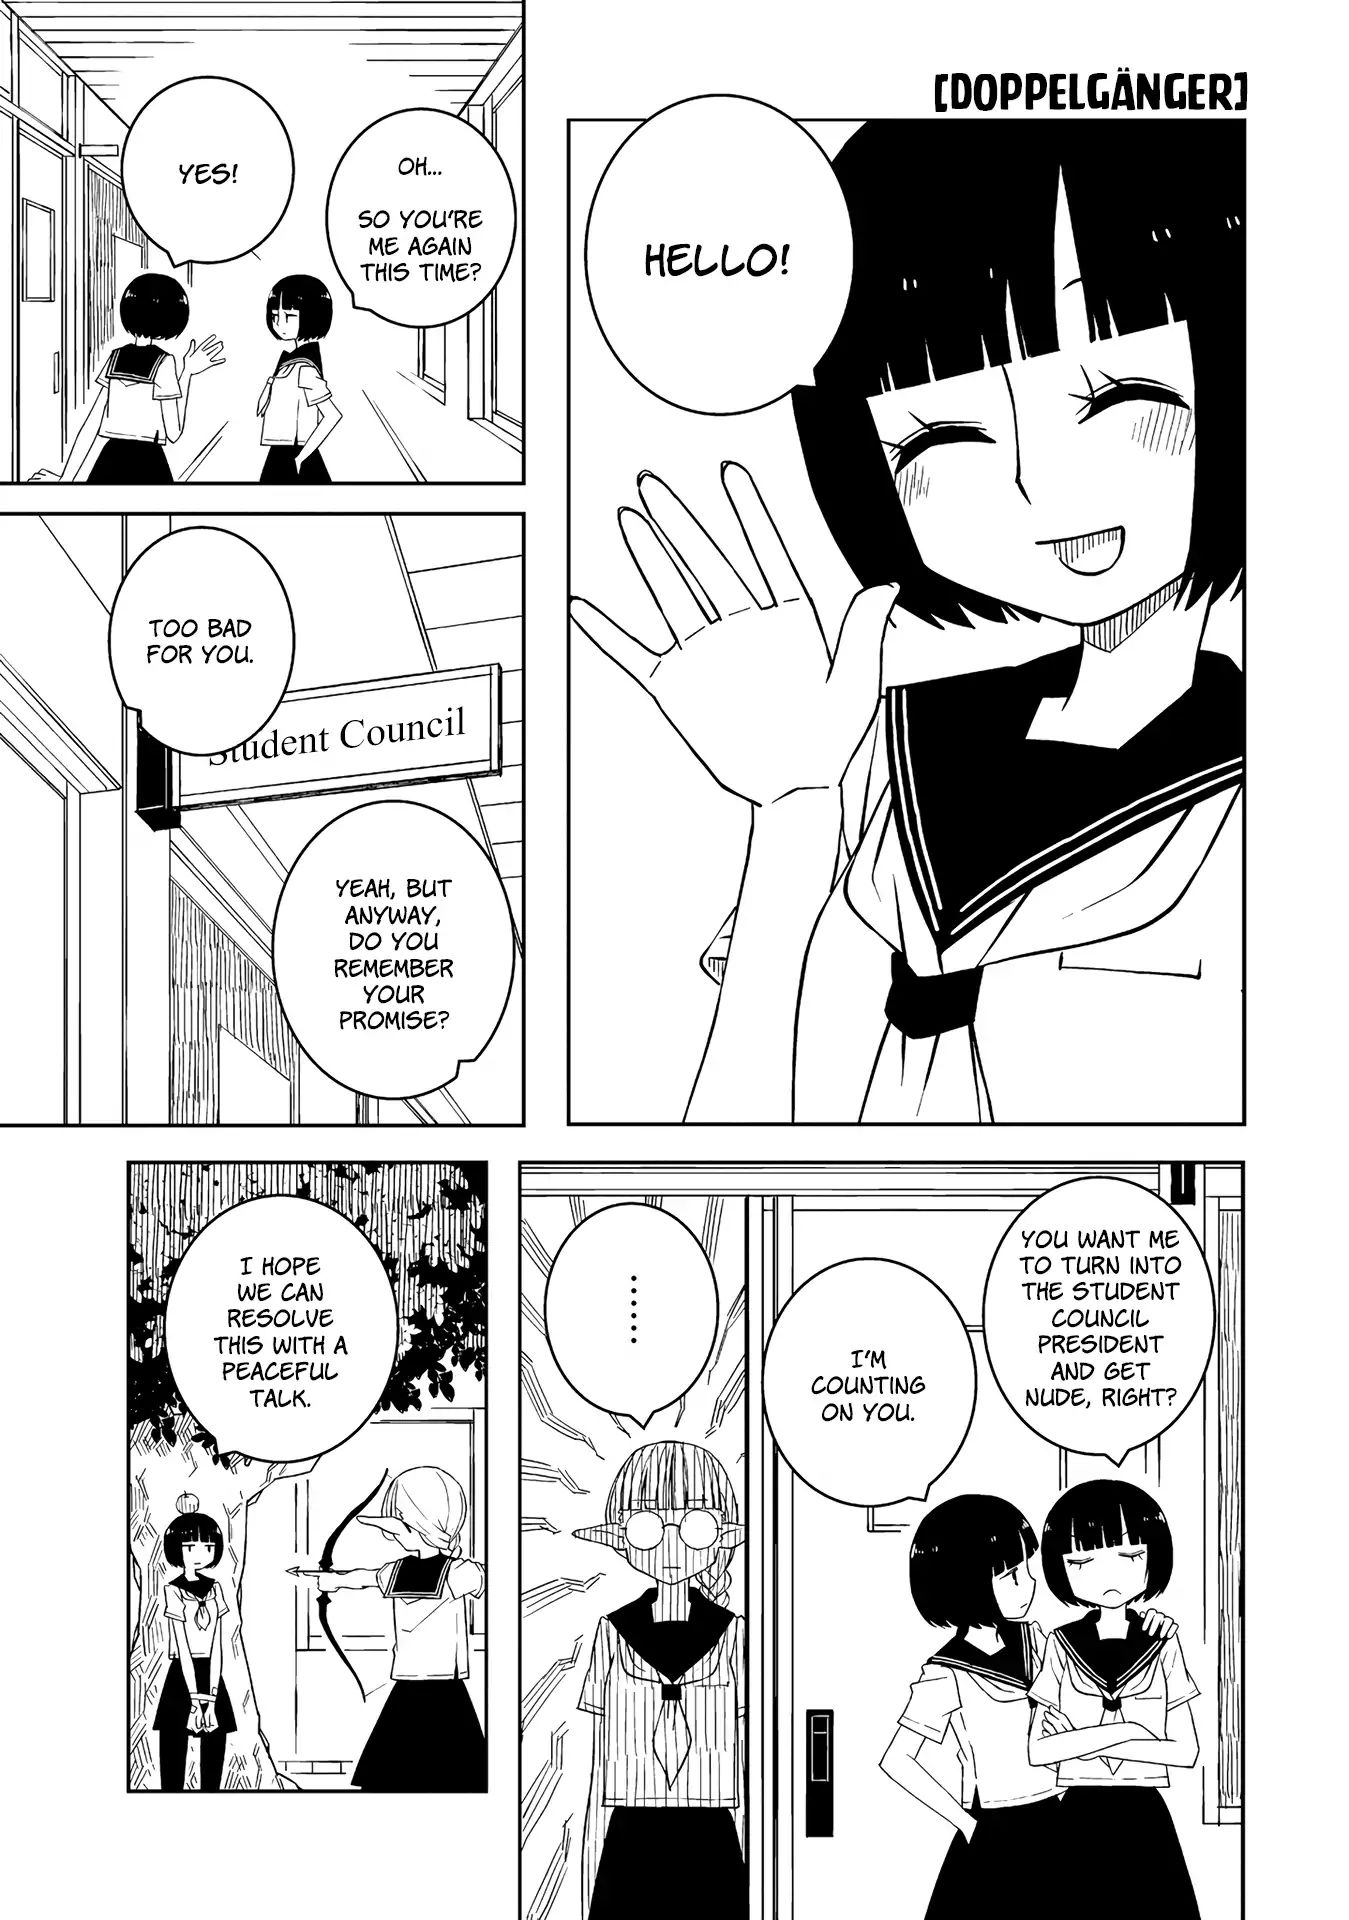 A Story About Doing Xx To Girls From Different Species Vol.1 Chapter 8